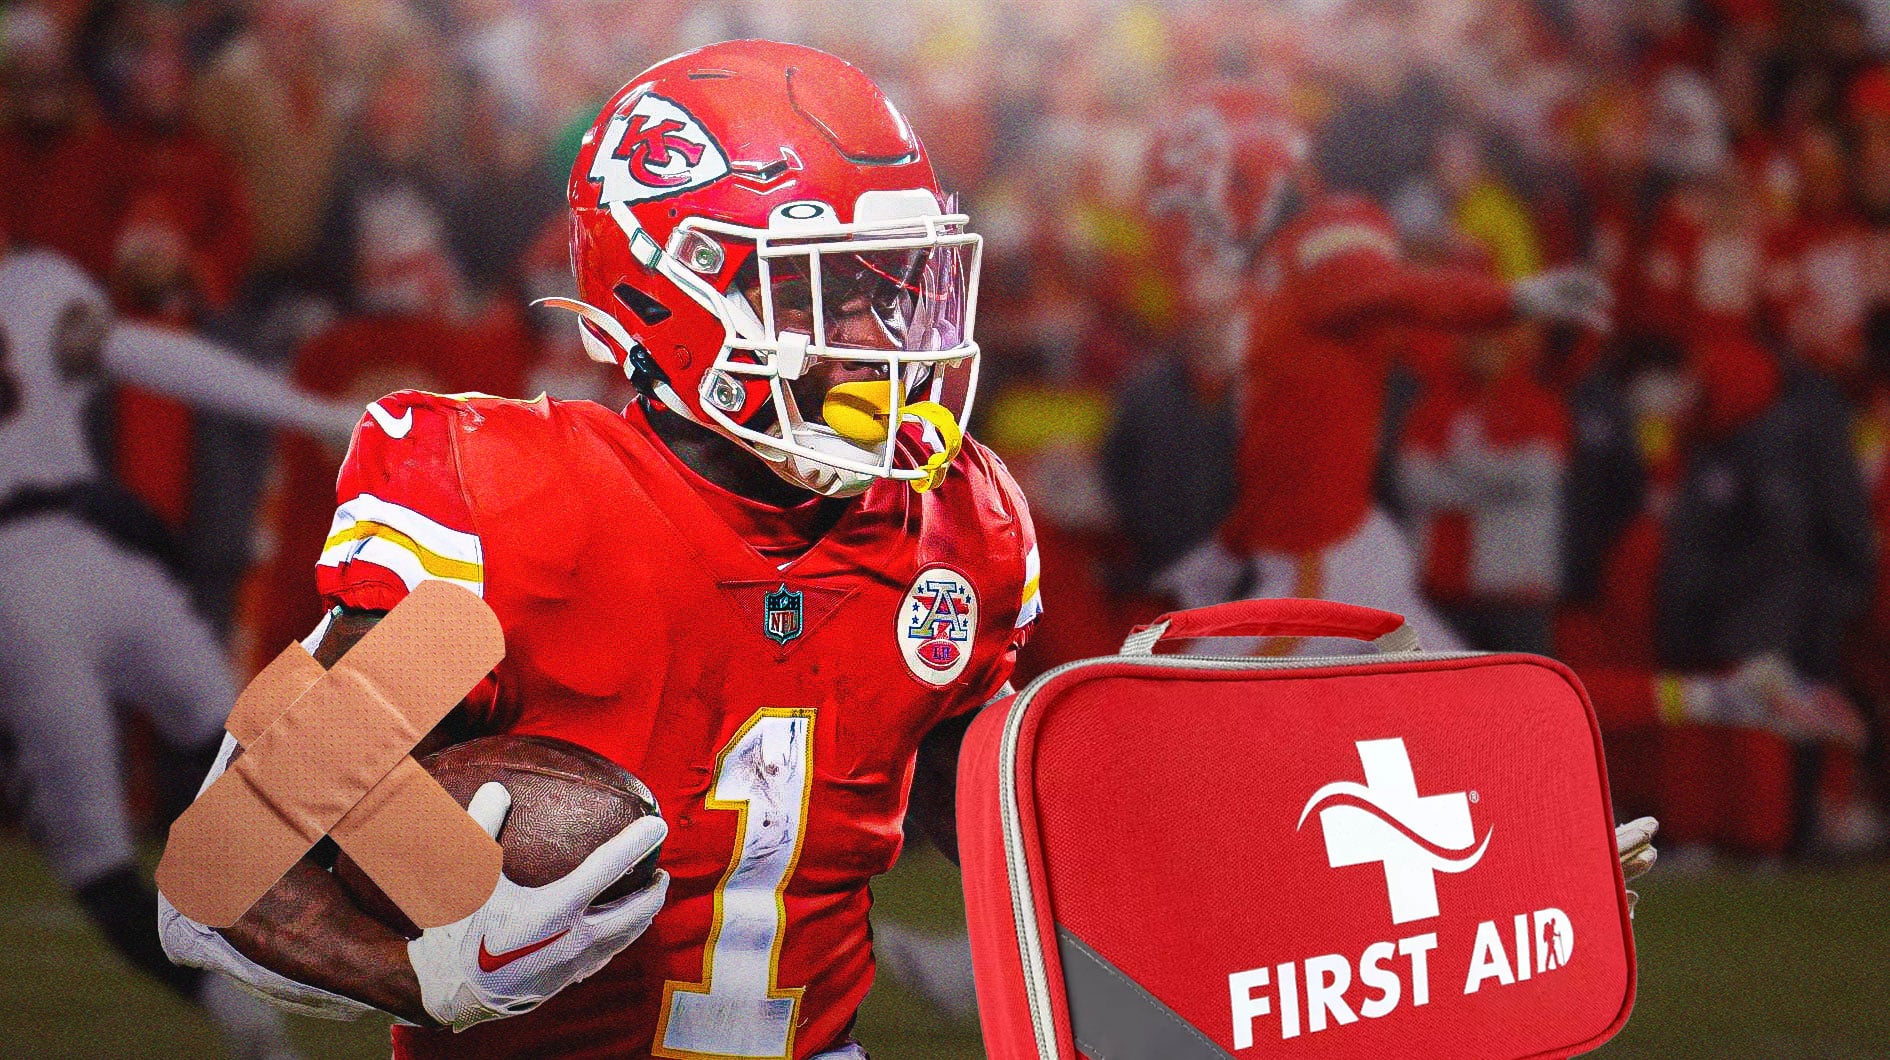 He has as been ruled out of the Chiefs' game against the Packers.